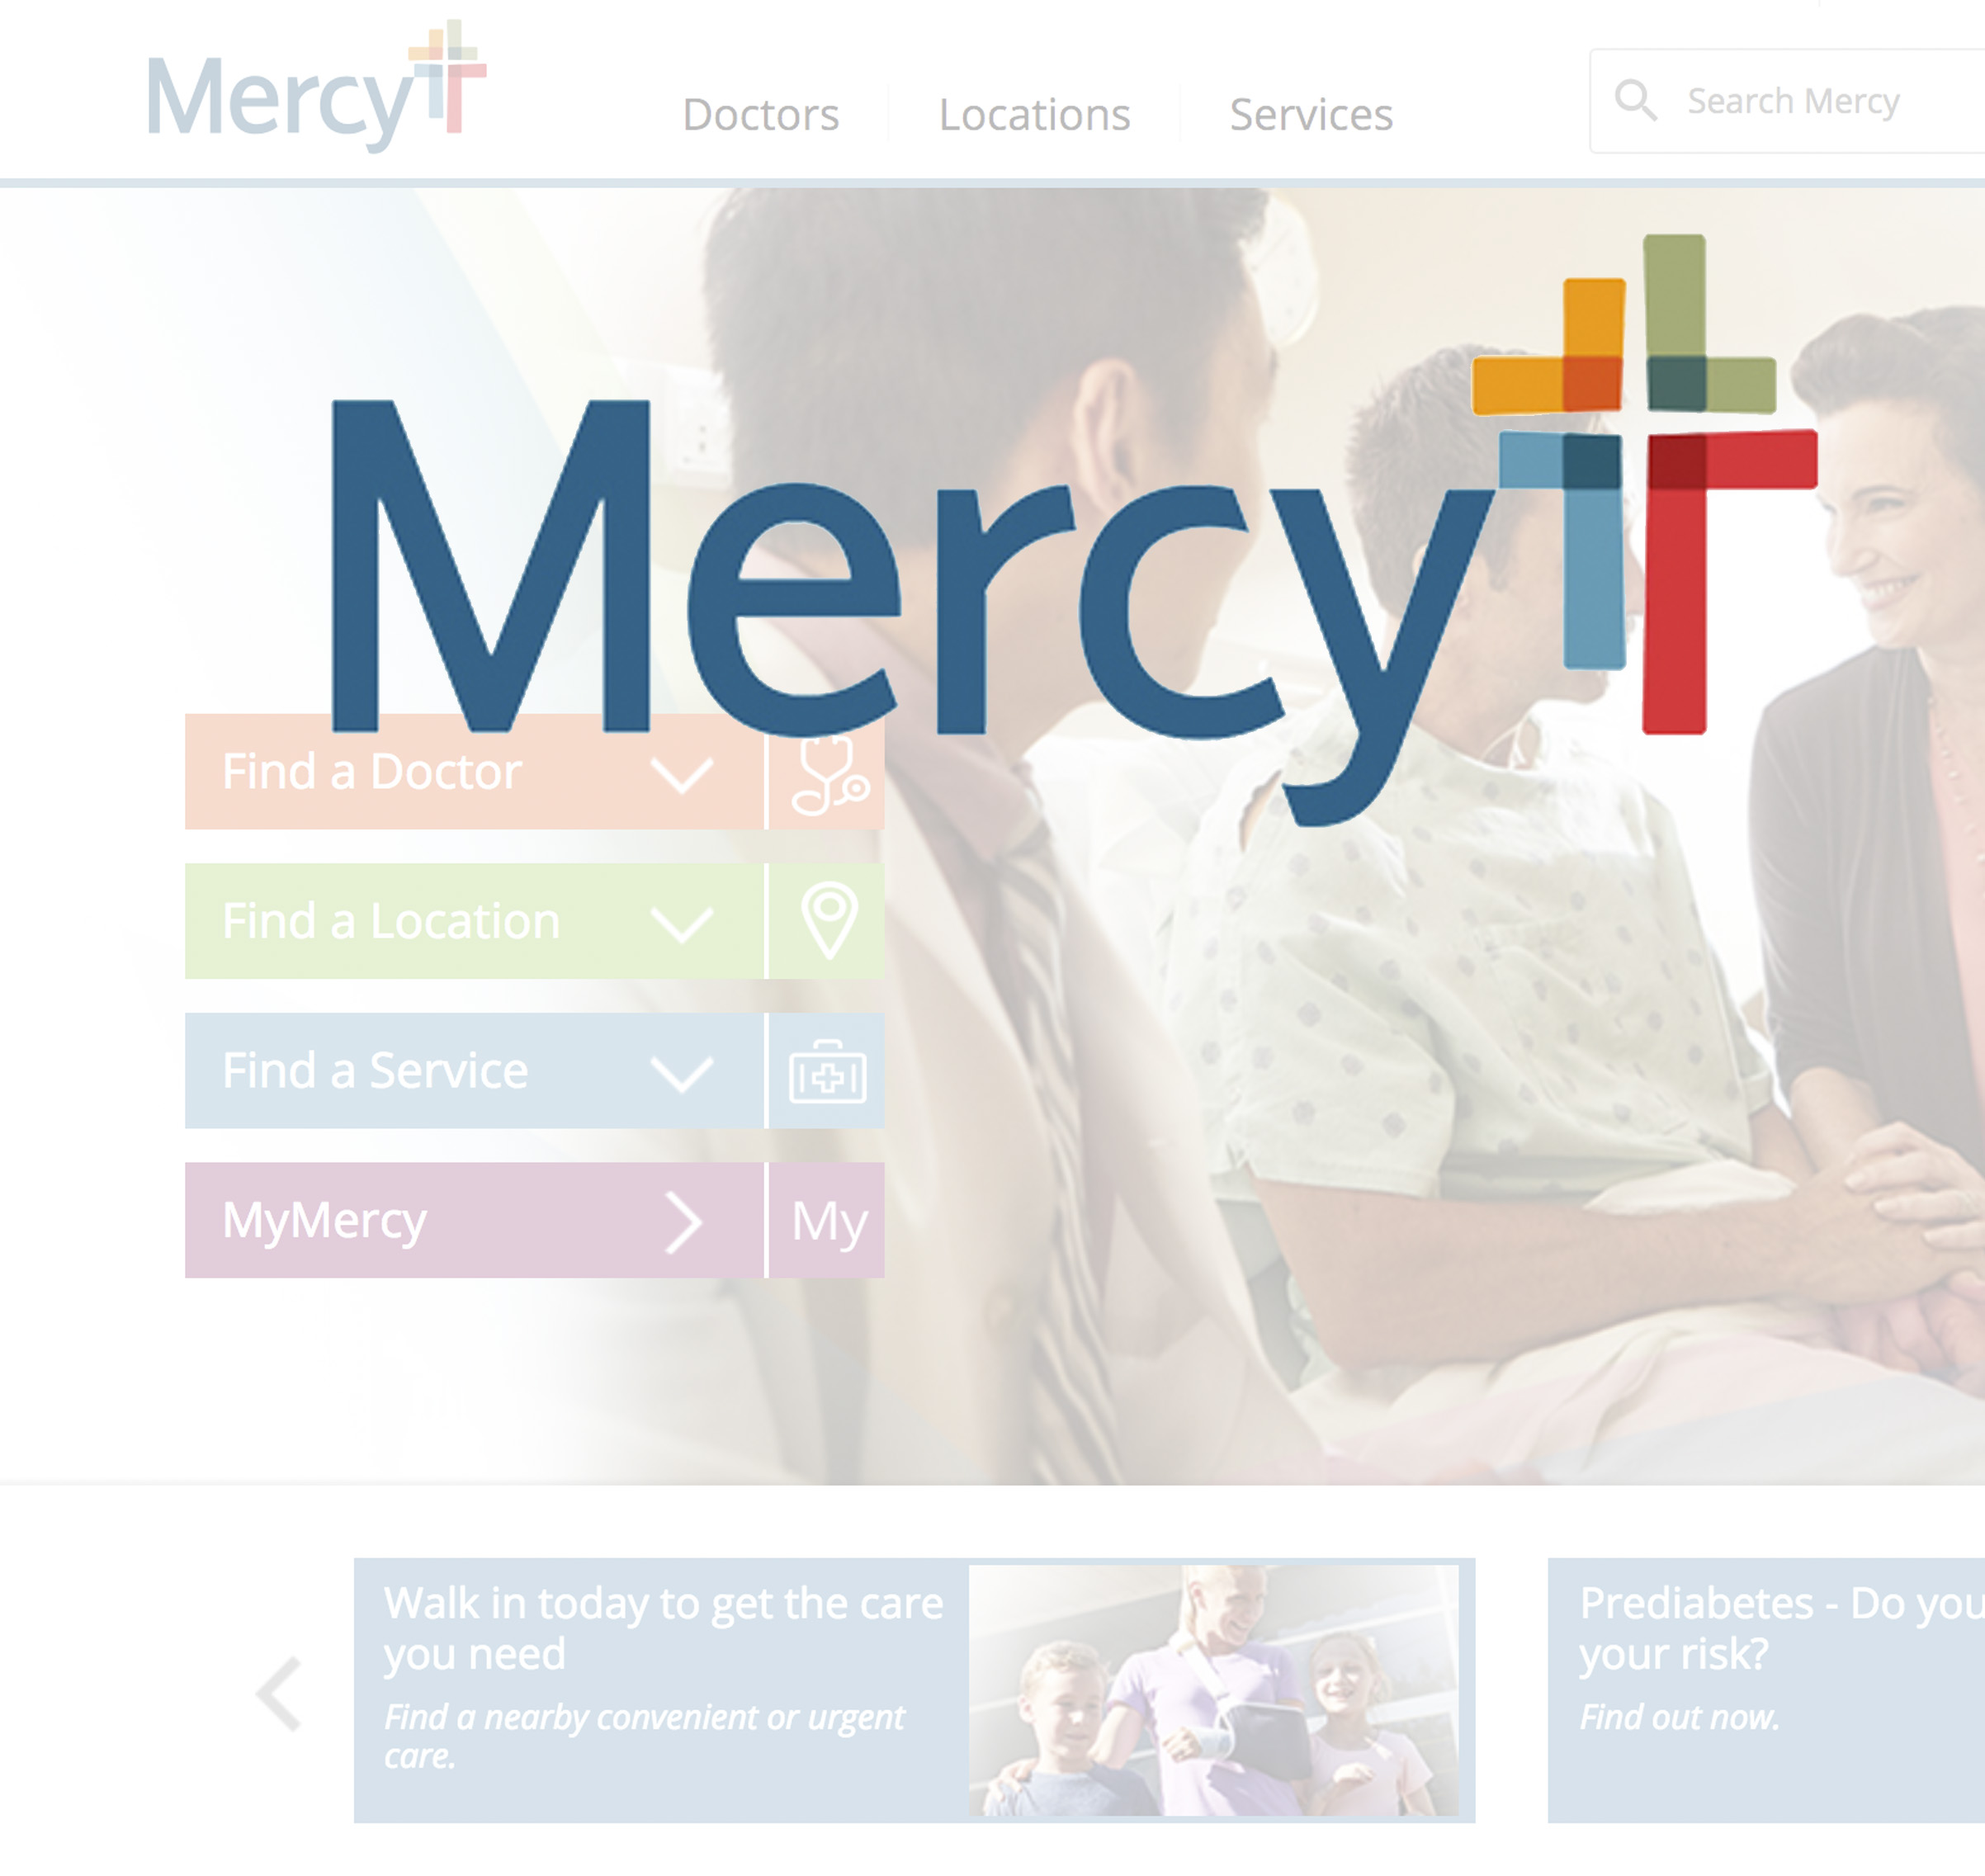 Mercy Health: The Digital Transformation of a Leading Health System